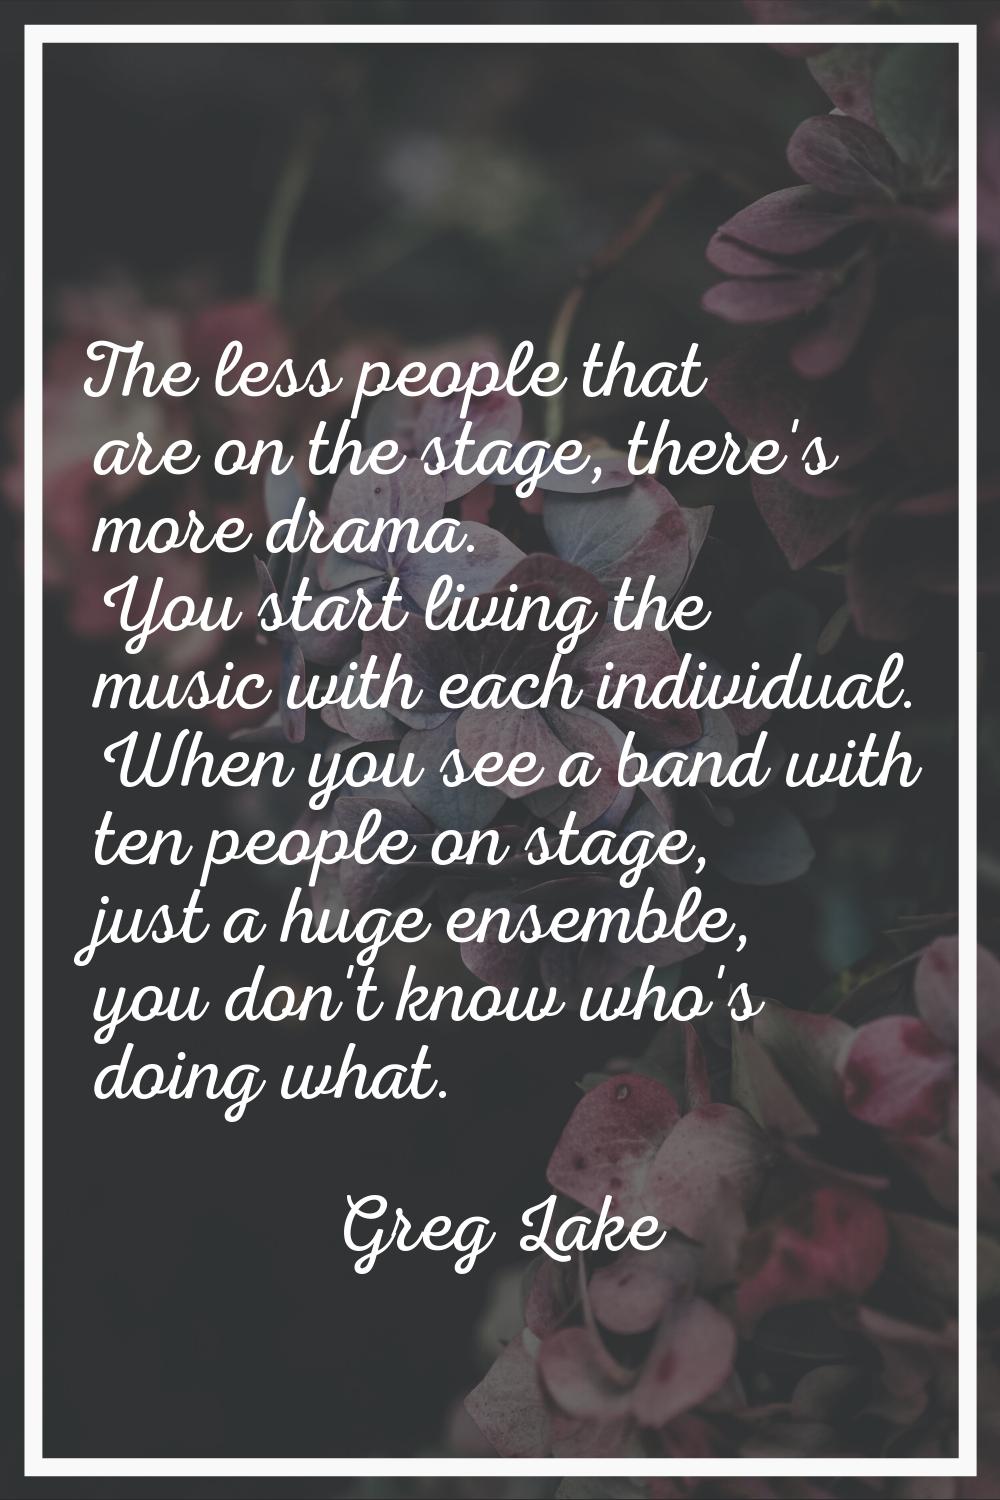 The less people that are on the stage, there's more drama. You start living the music with each ind